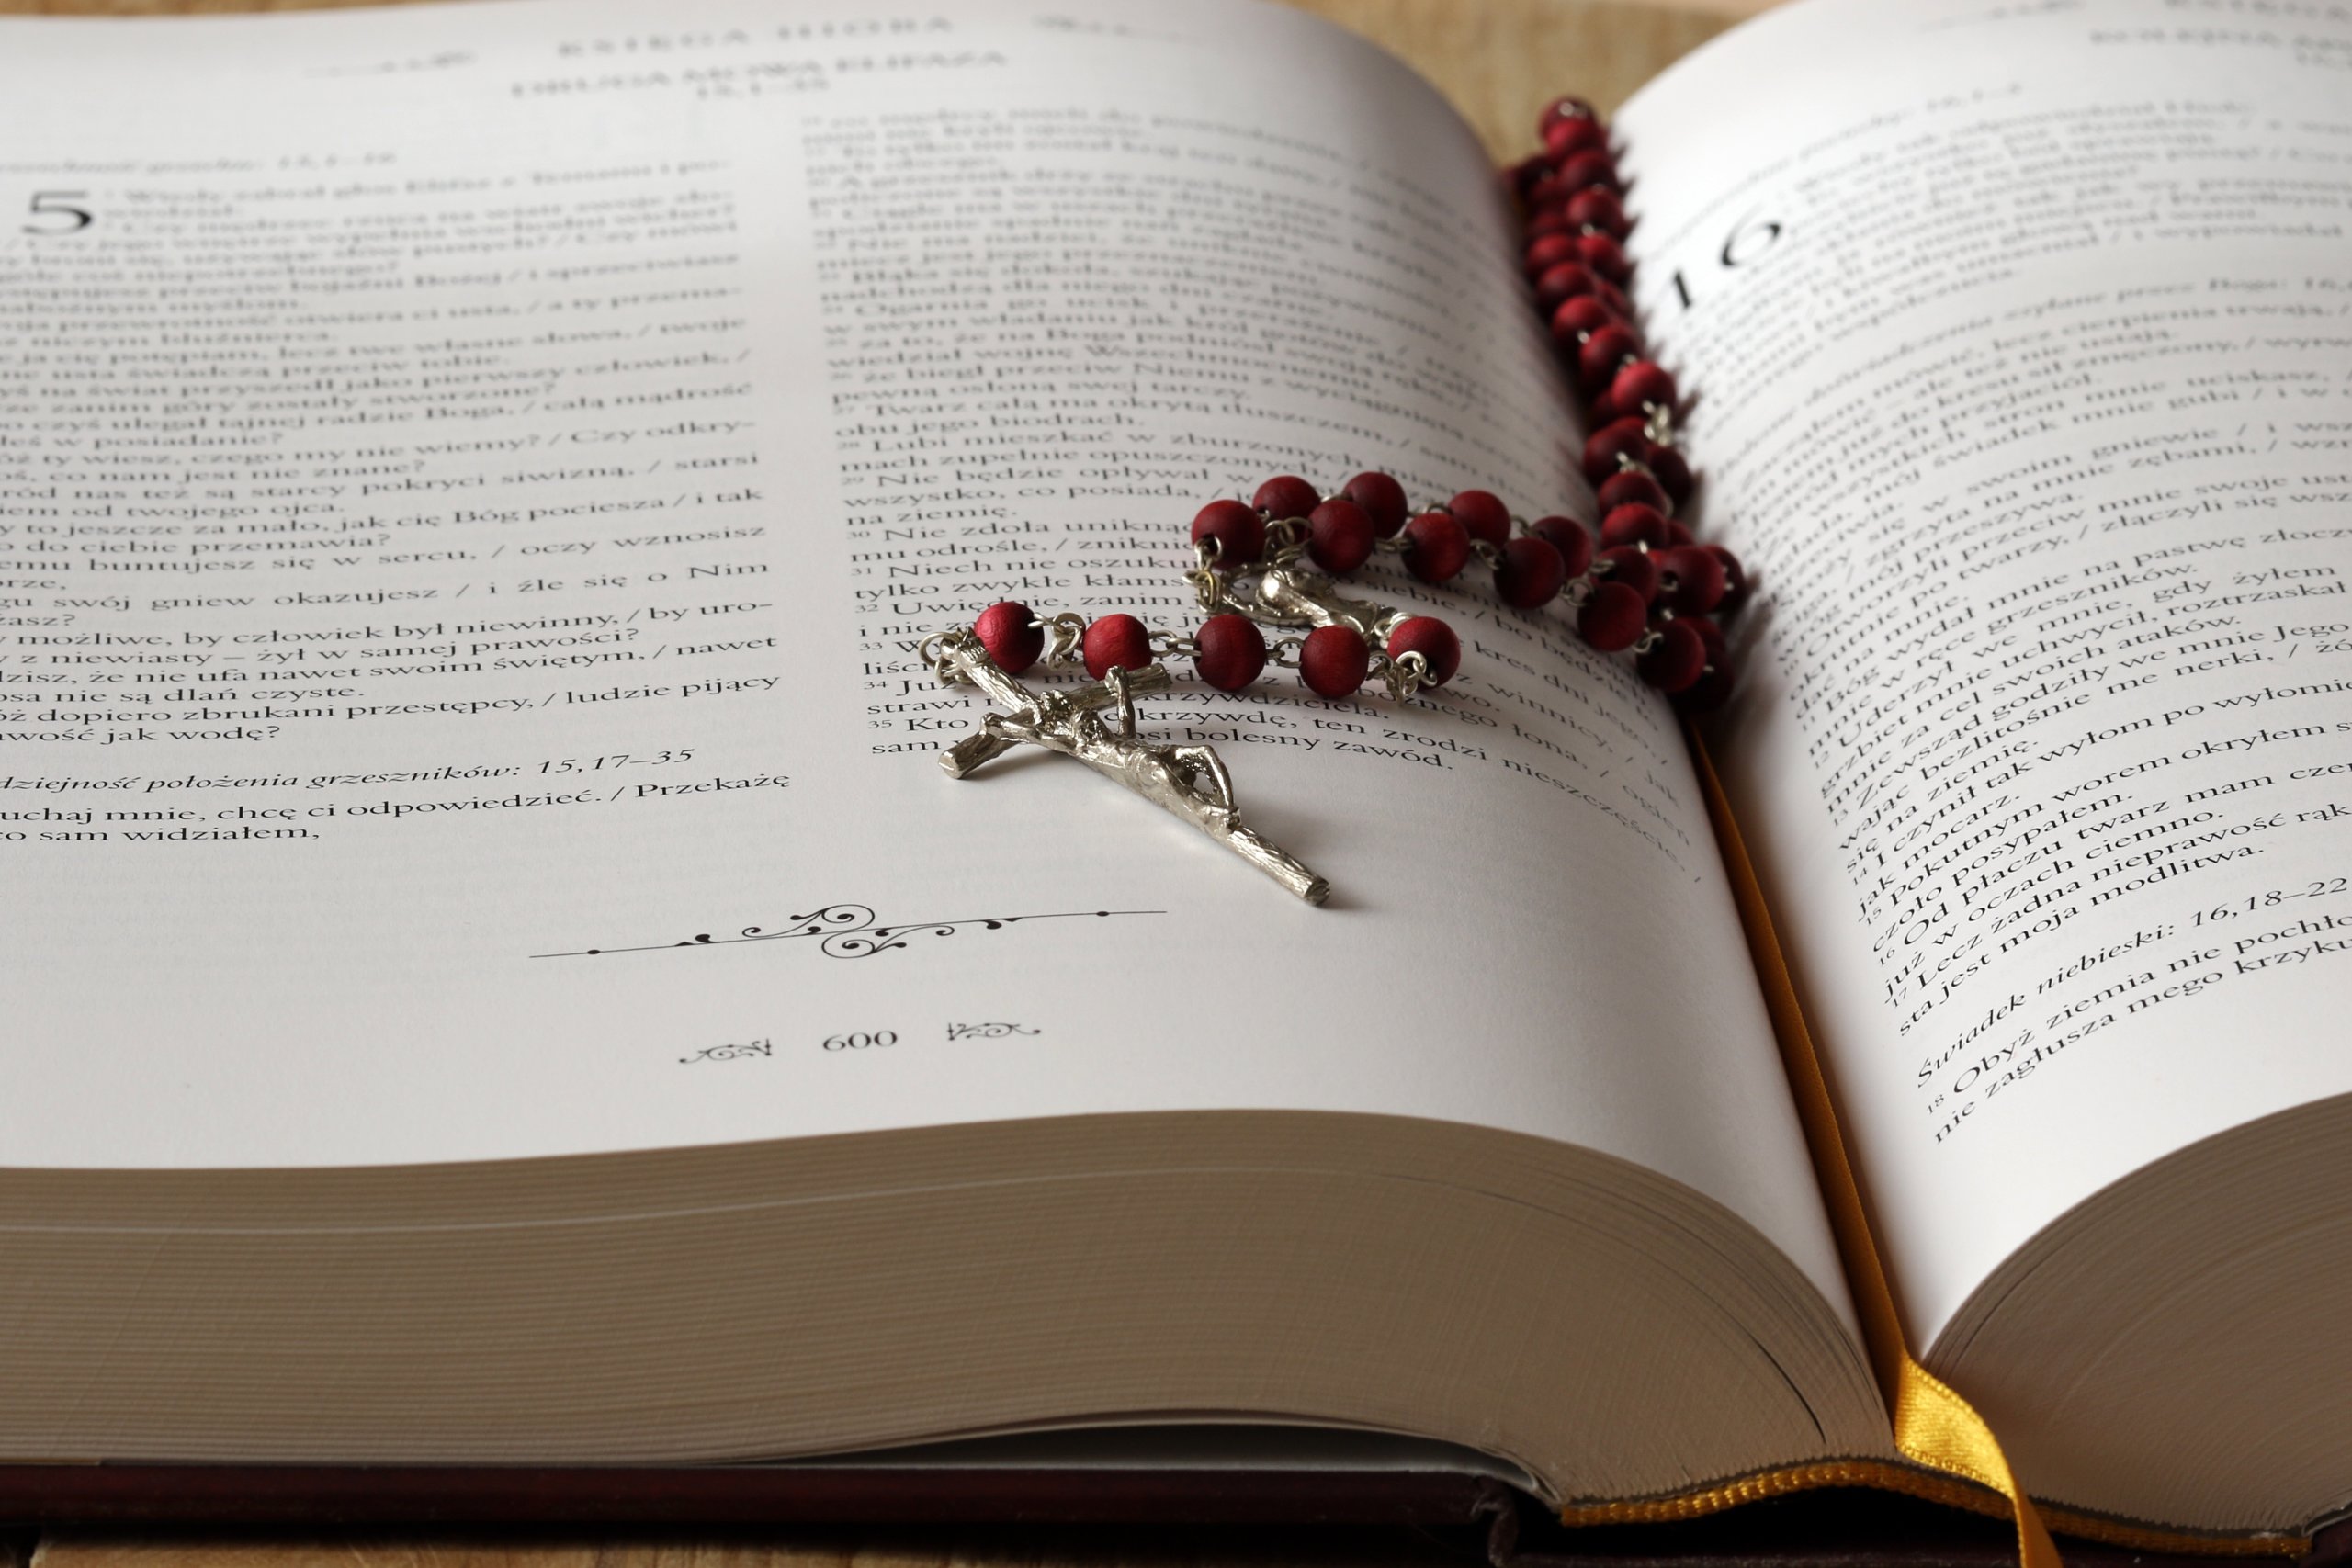 beads-bible-blur-book-236339-scaled